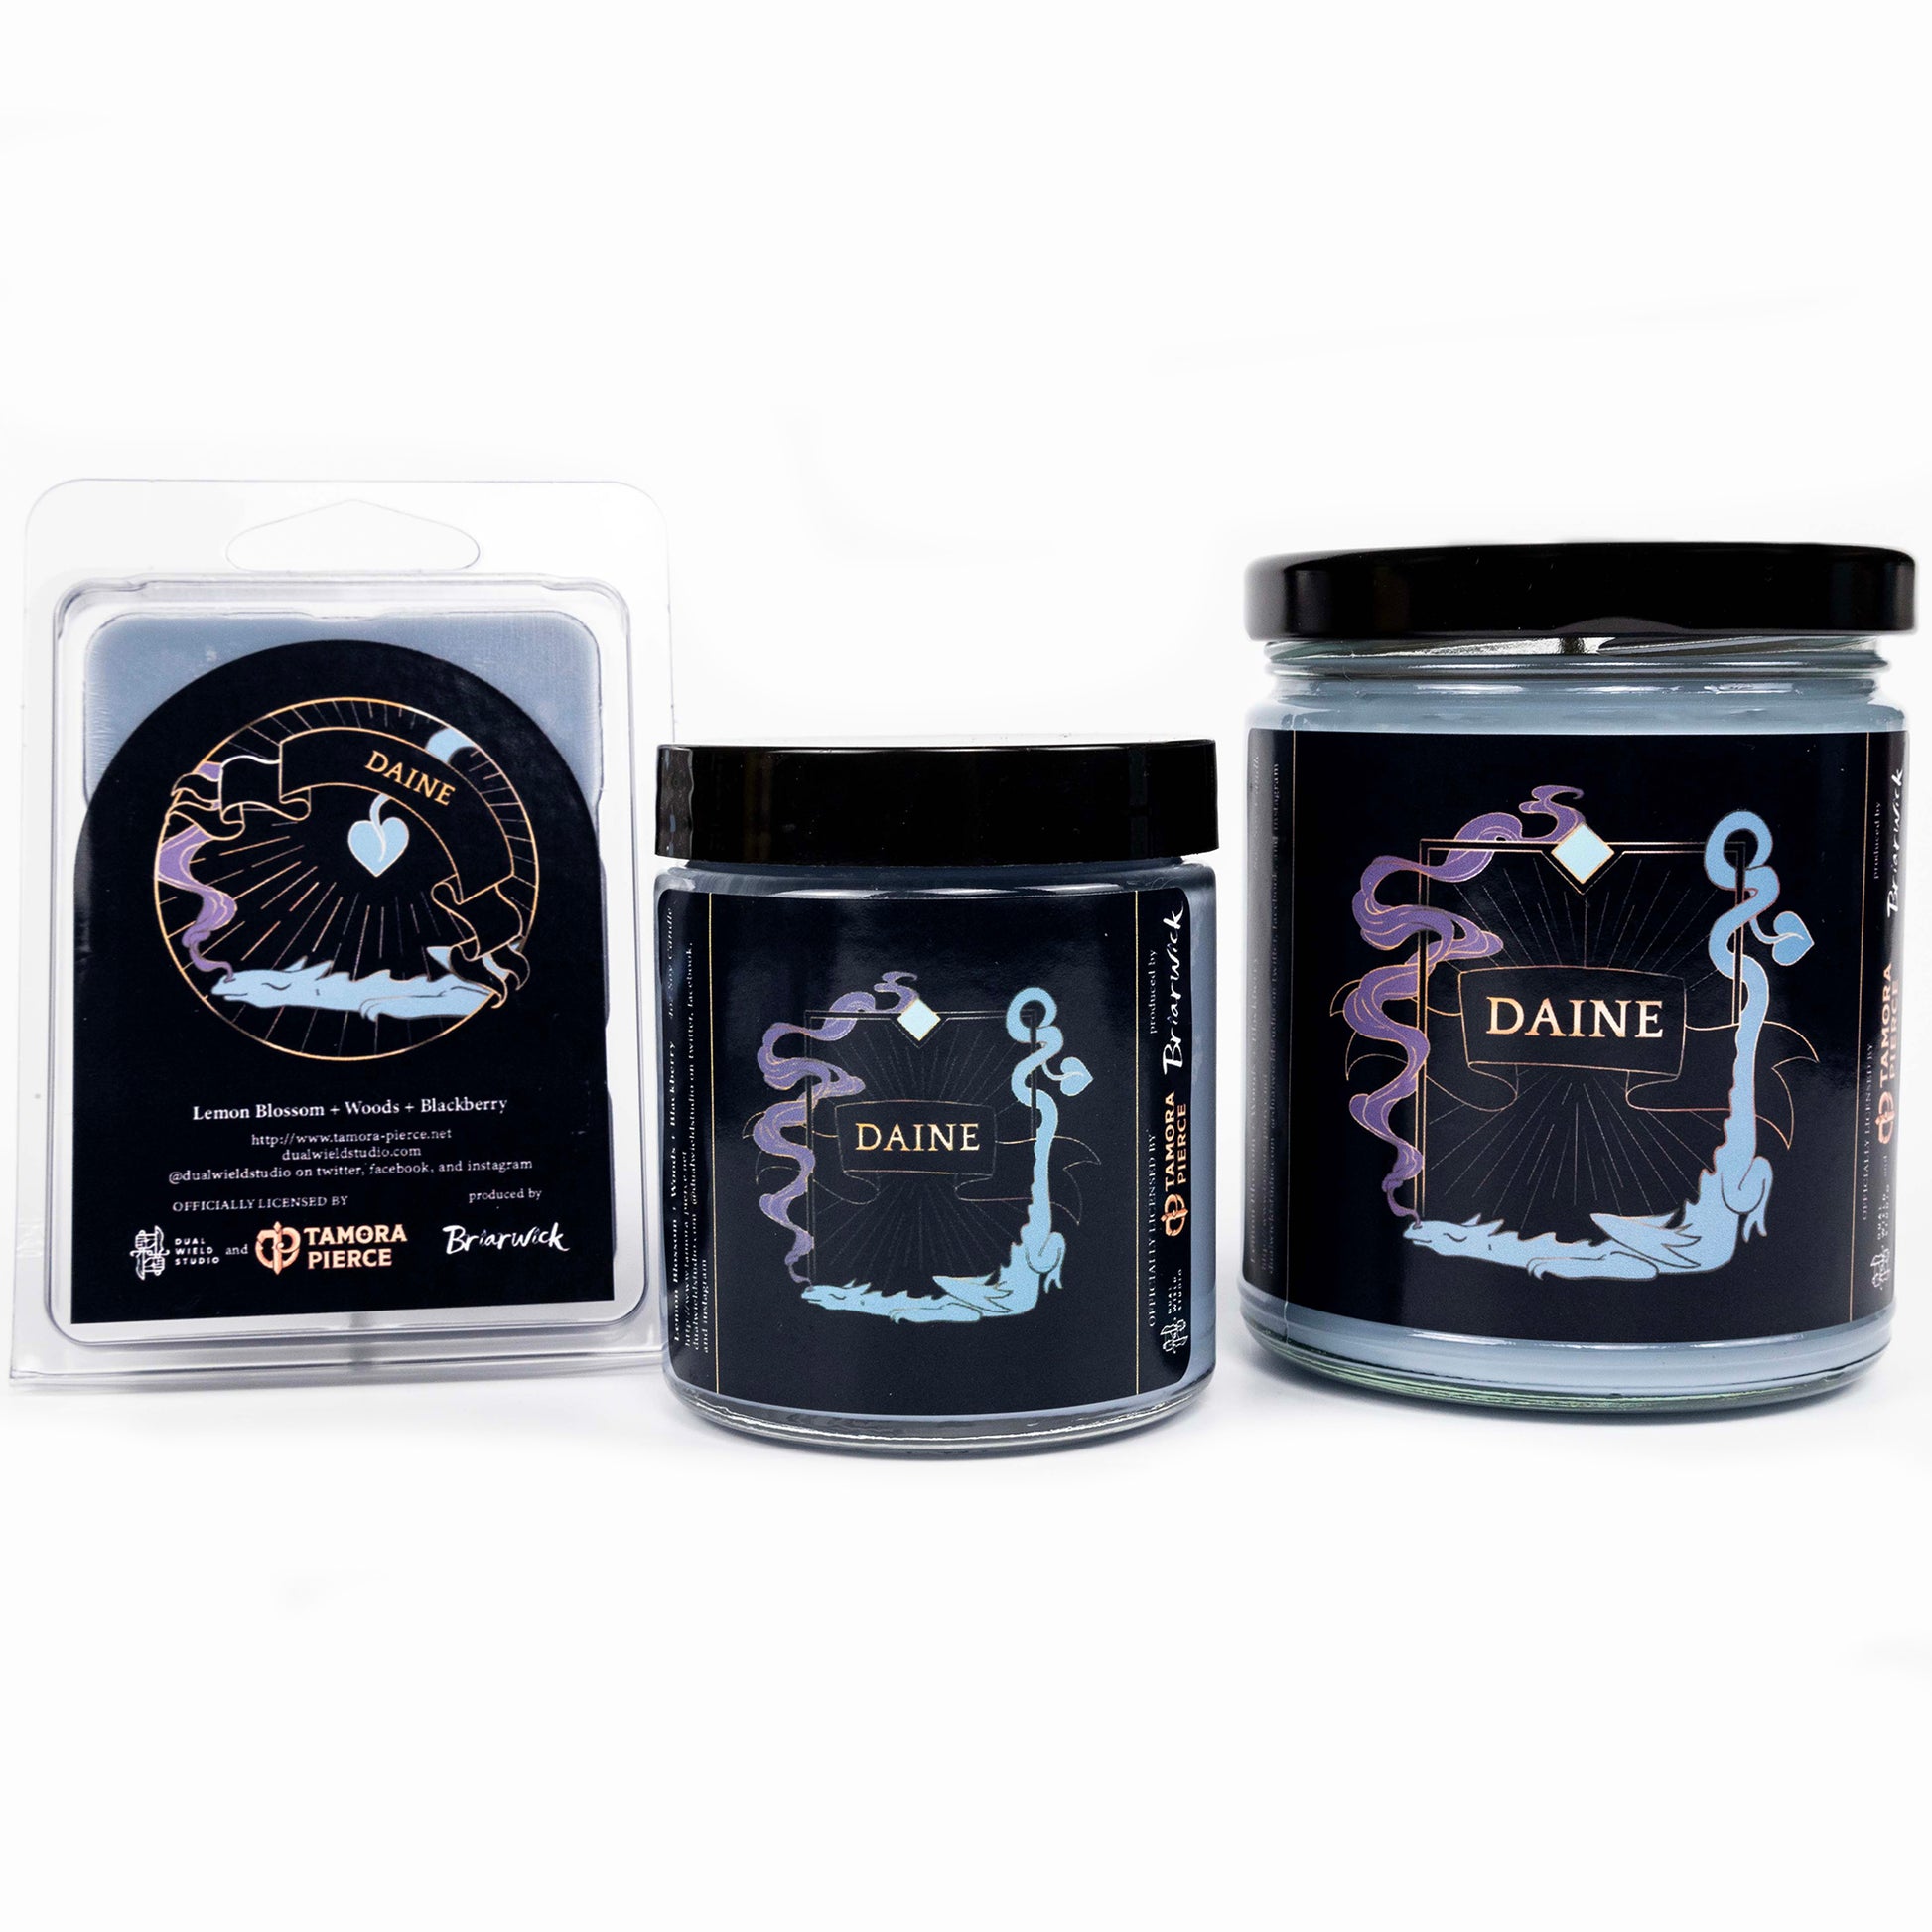 Full set of both Daine candles and wax melts, all with teal wax. The label illustrations depict a snoozing dragon breathing out purple smoke in a rectangular design. Daine is emblazoned across a central ribbon.